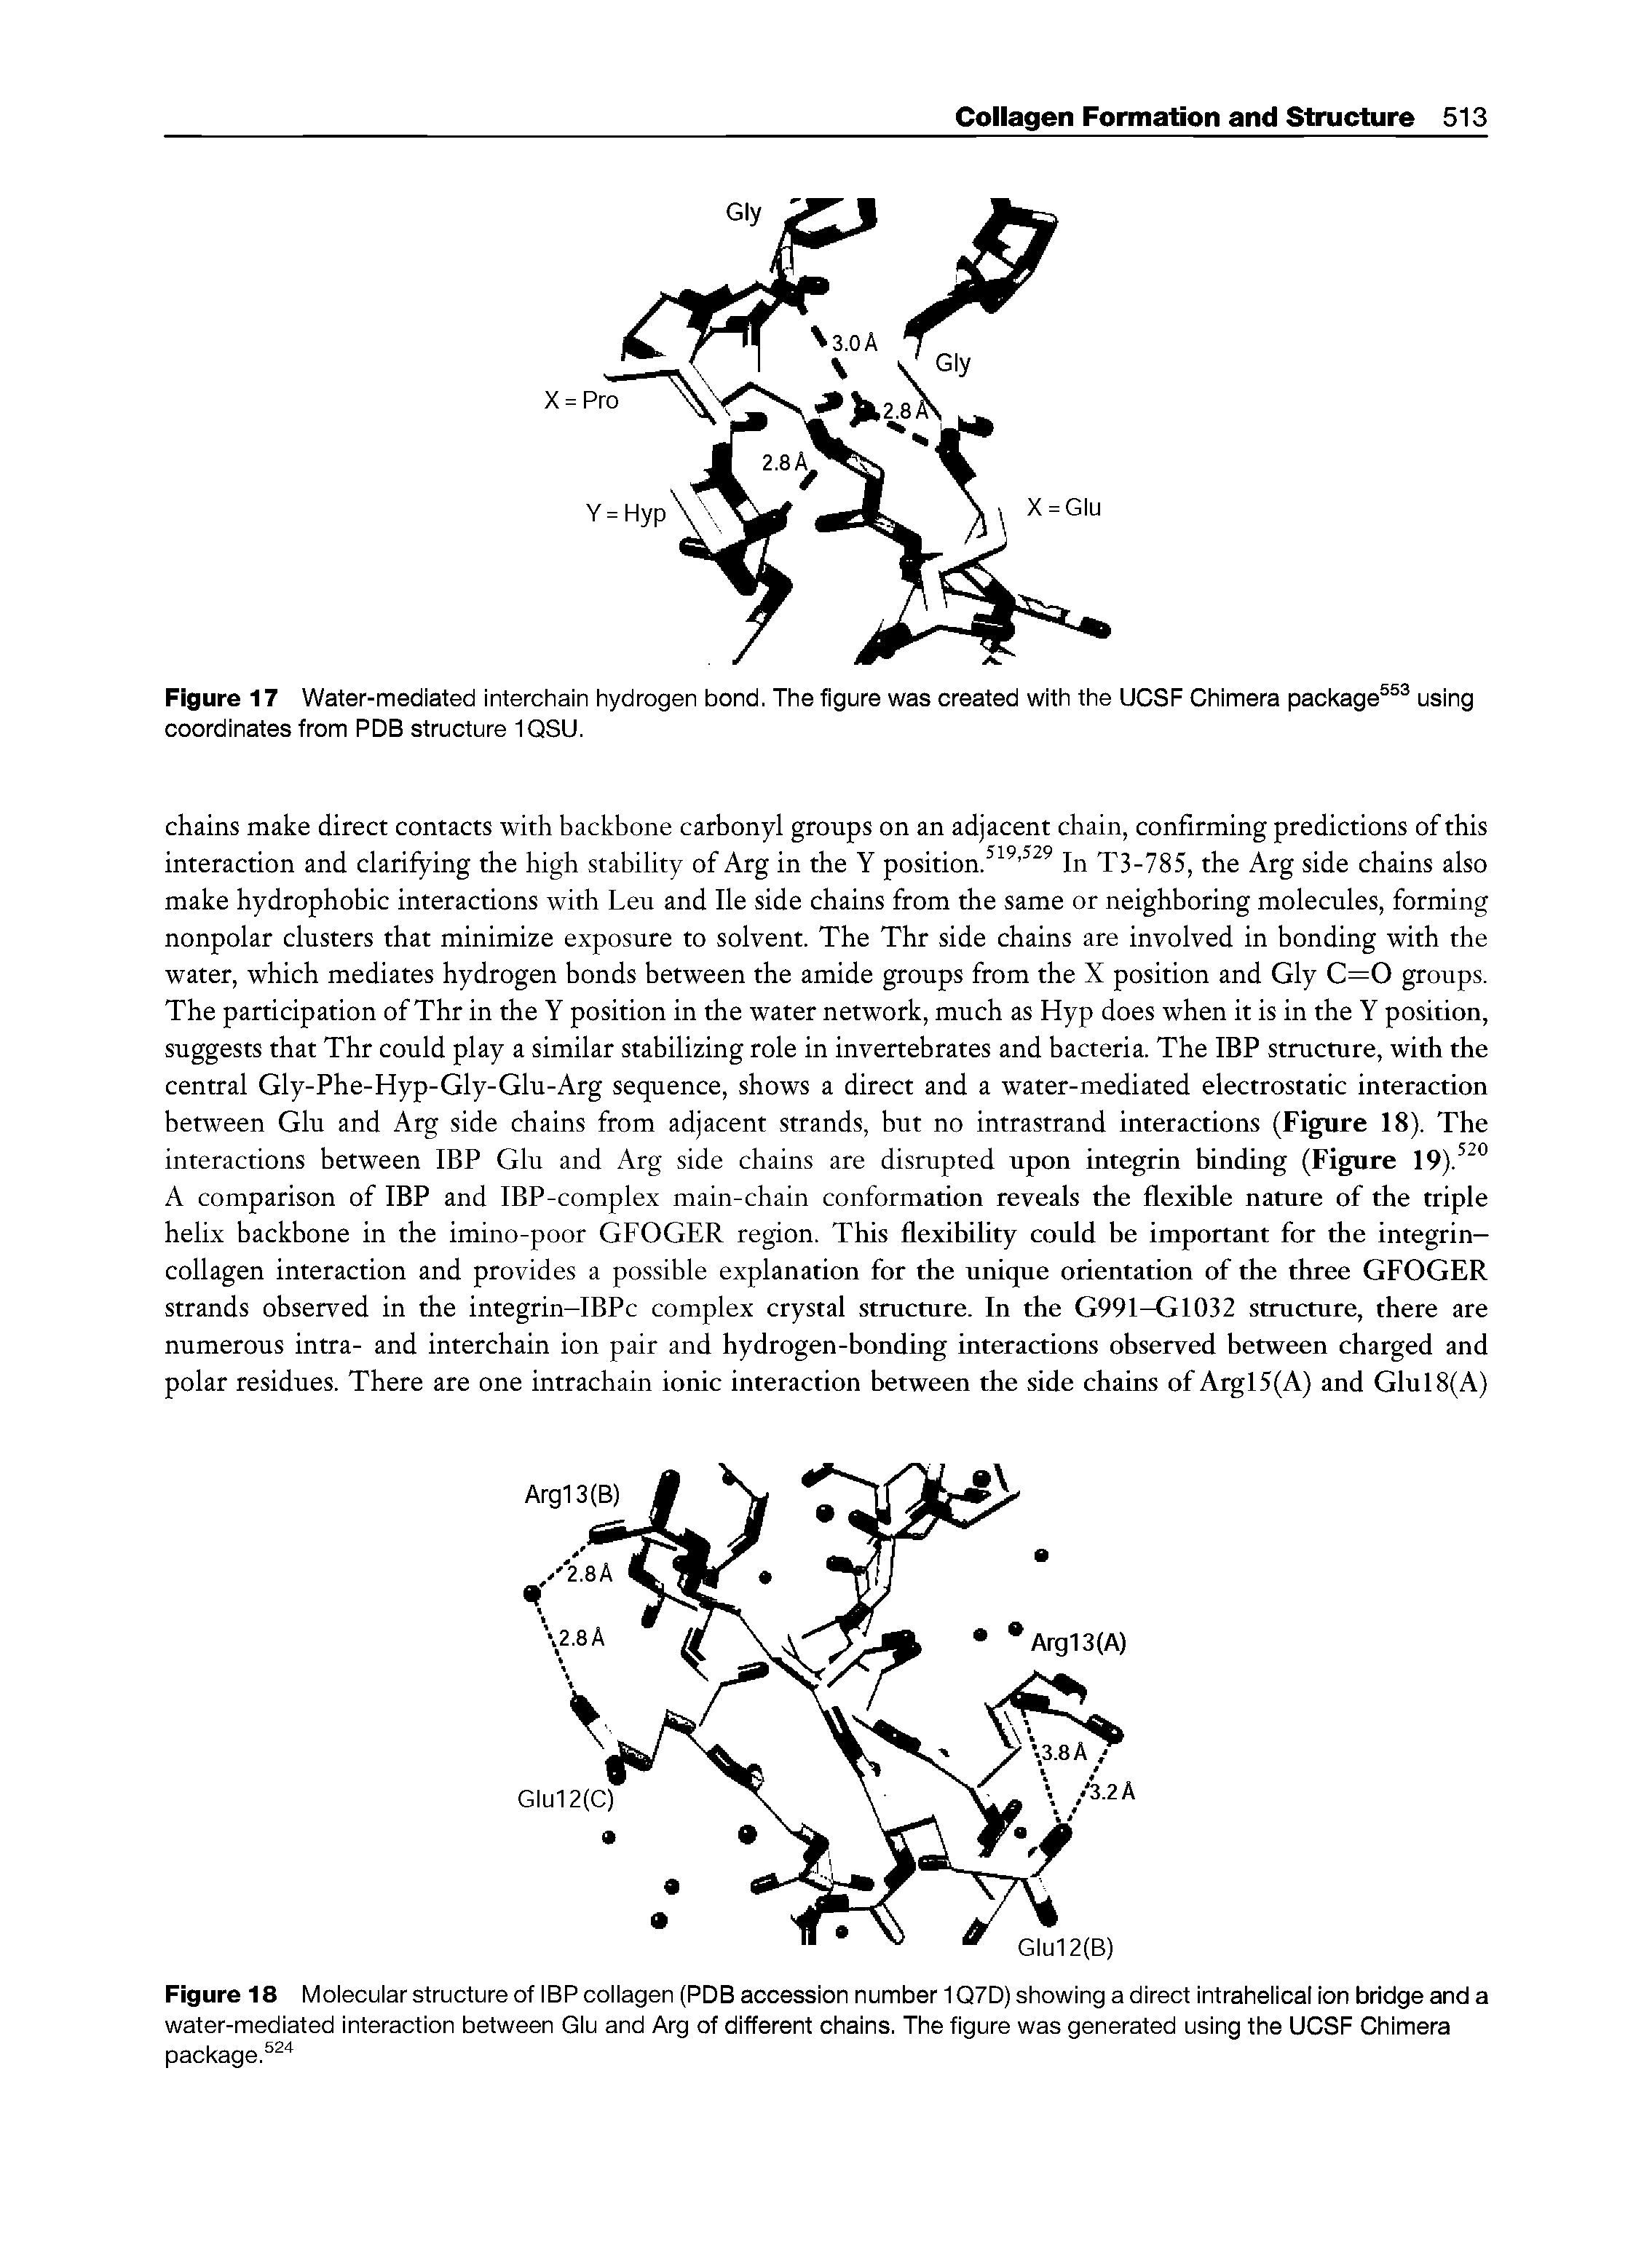 Figure 17 Water-mediated interchain hydrogen bond. The figure was created with the UCSF Chimera package coordinates from PDB structure 1QSU.